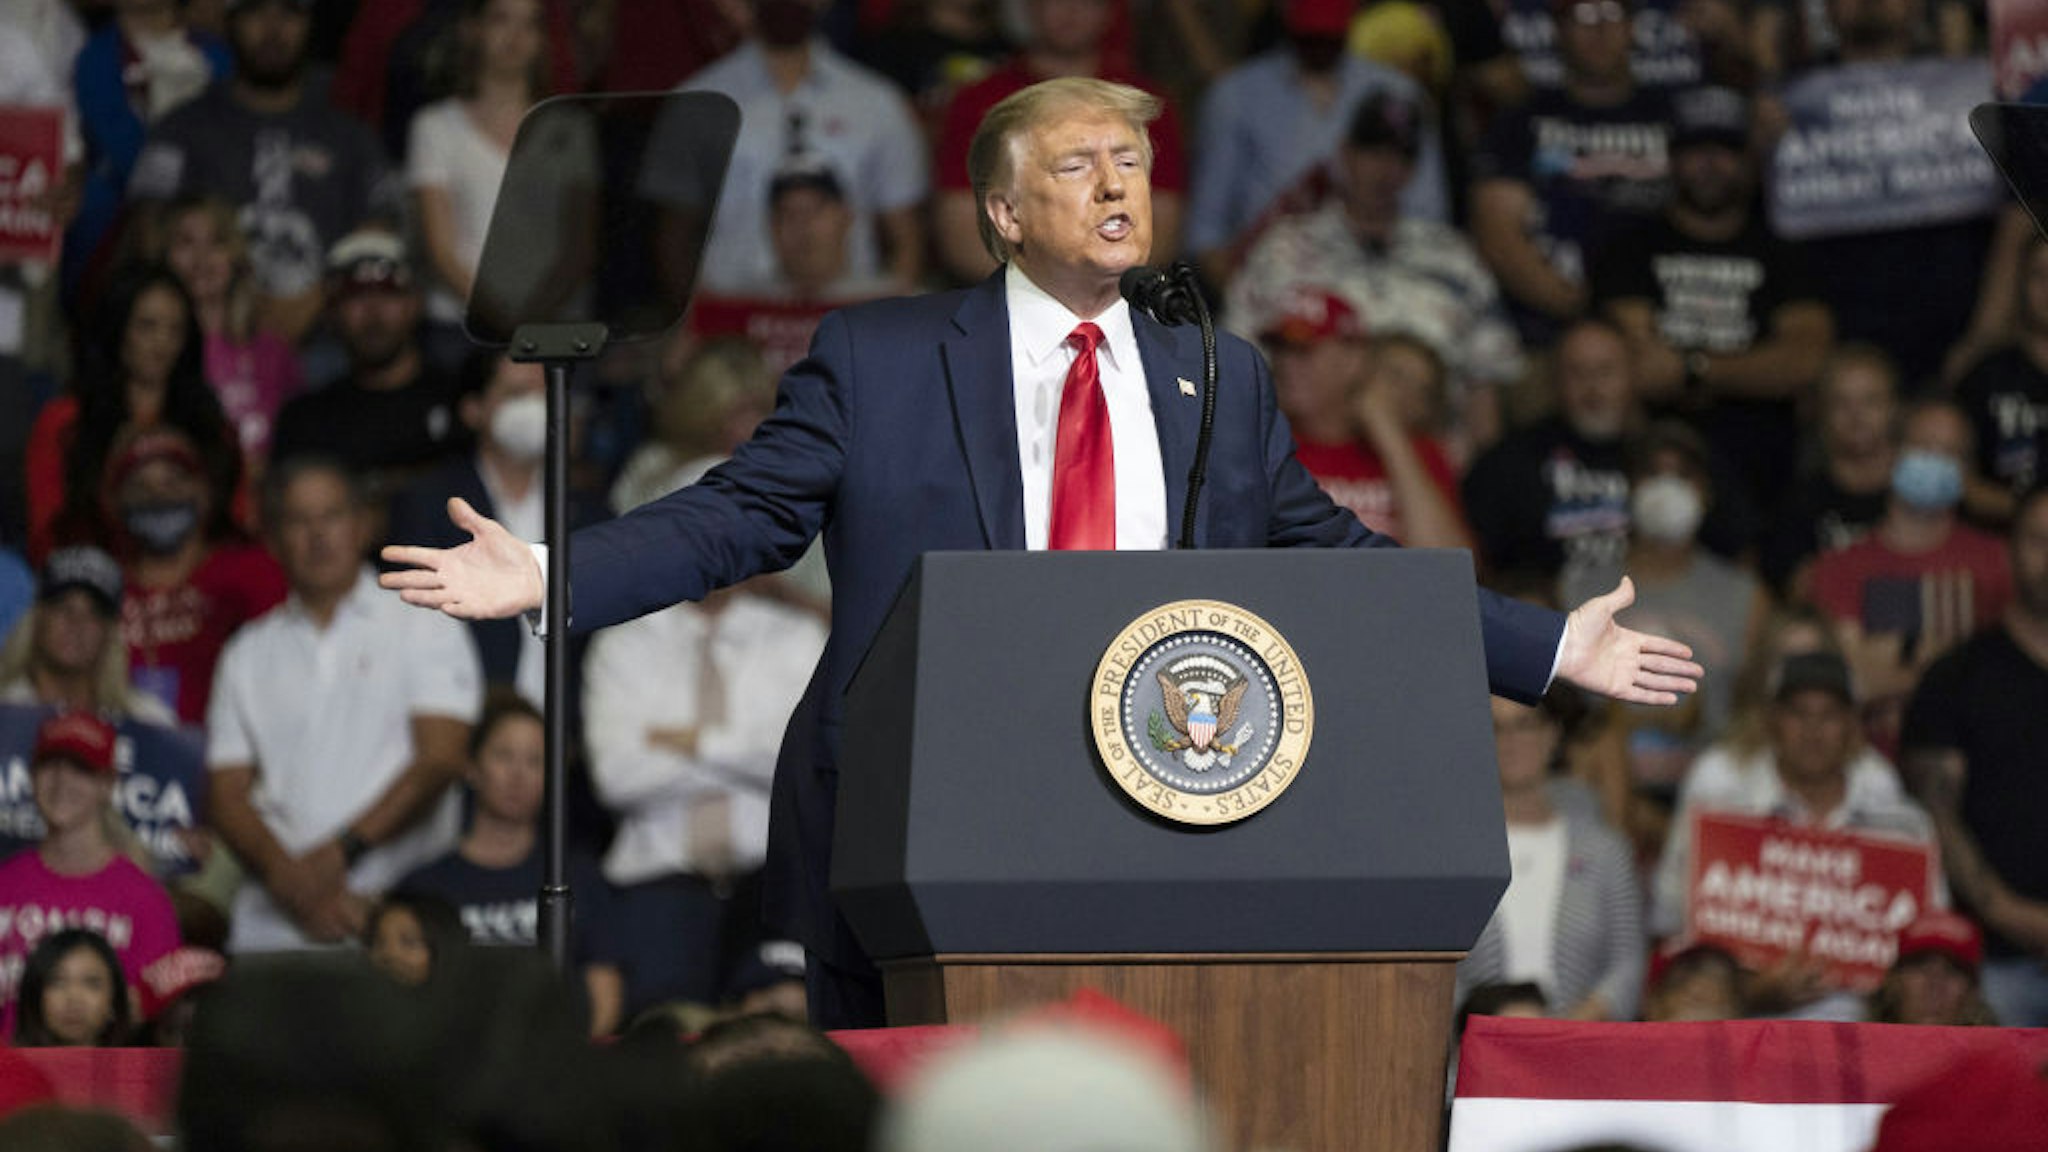 U.S. President Donald Trump speaks during a rally in Tulsa, Oklahoma, U.S., on Saturday, June 20, 2020. Trump's first campaign rally since the coronavirus pandemic took hold in the U.S. drew far fewer supporters than the president and his advisers had predicted, a downbeat end to a day of controversy over efforts to oust a top prosecutor in New York. Photographer: Go Nakamura/Bloomberg via Getty Images